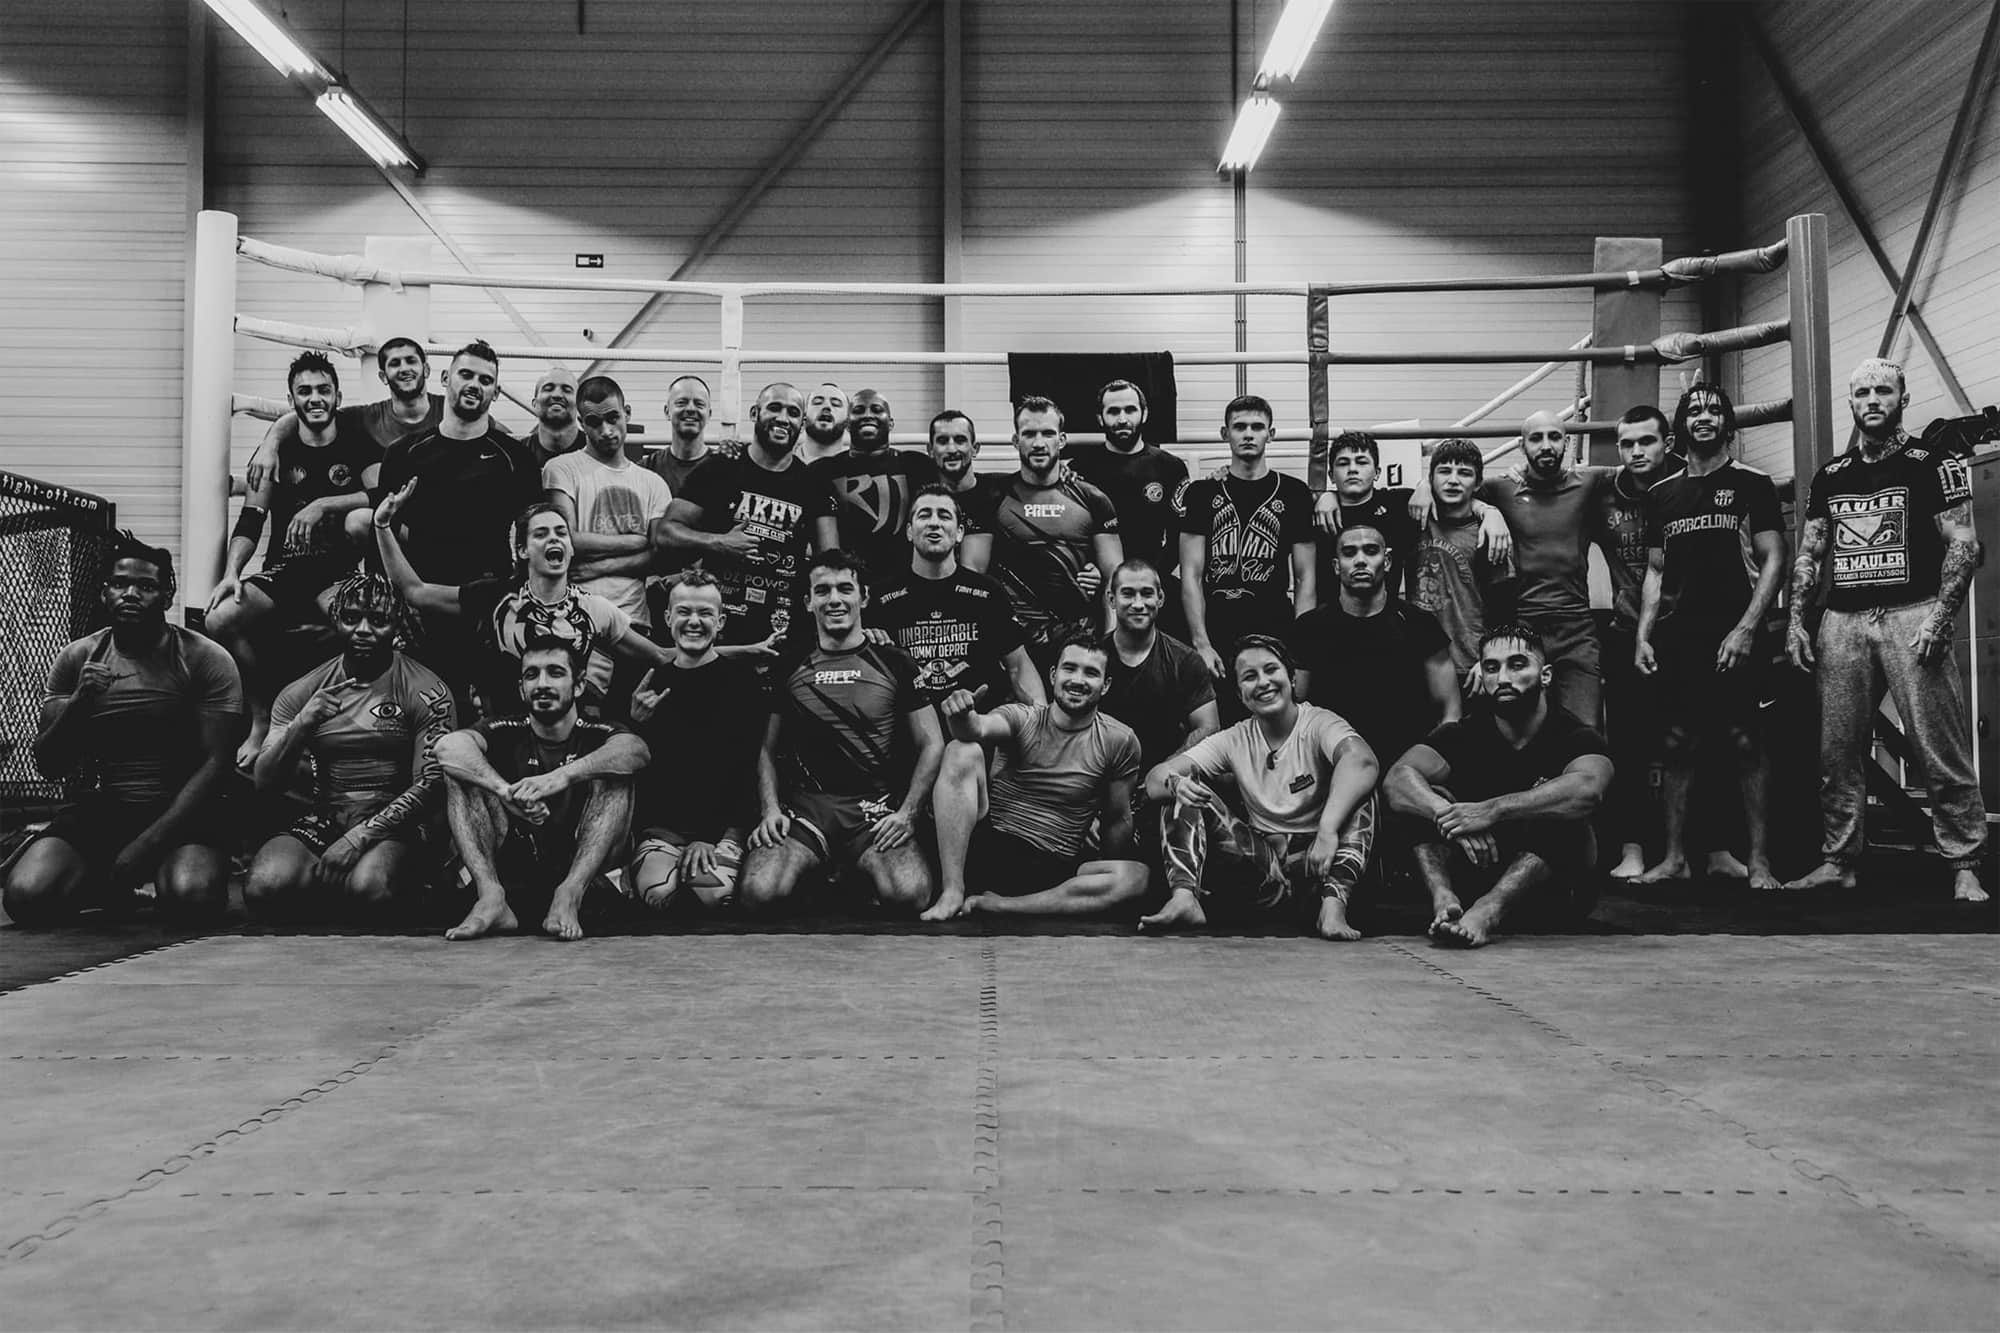 Belgian MMA Federation outlines plans for unified recognition